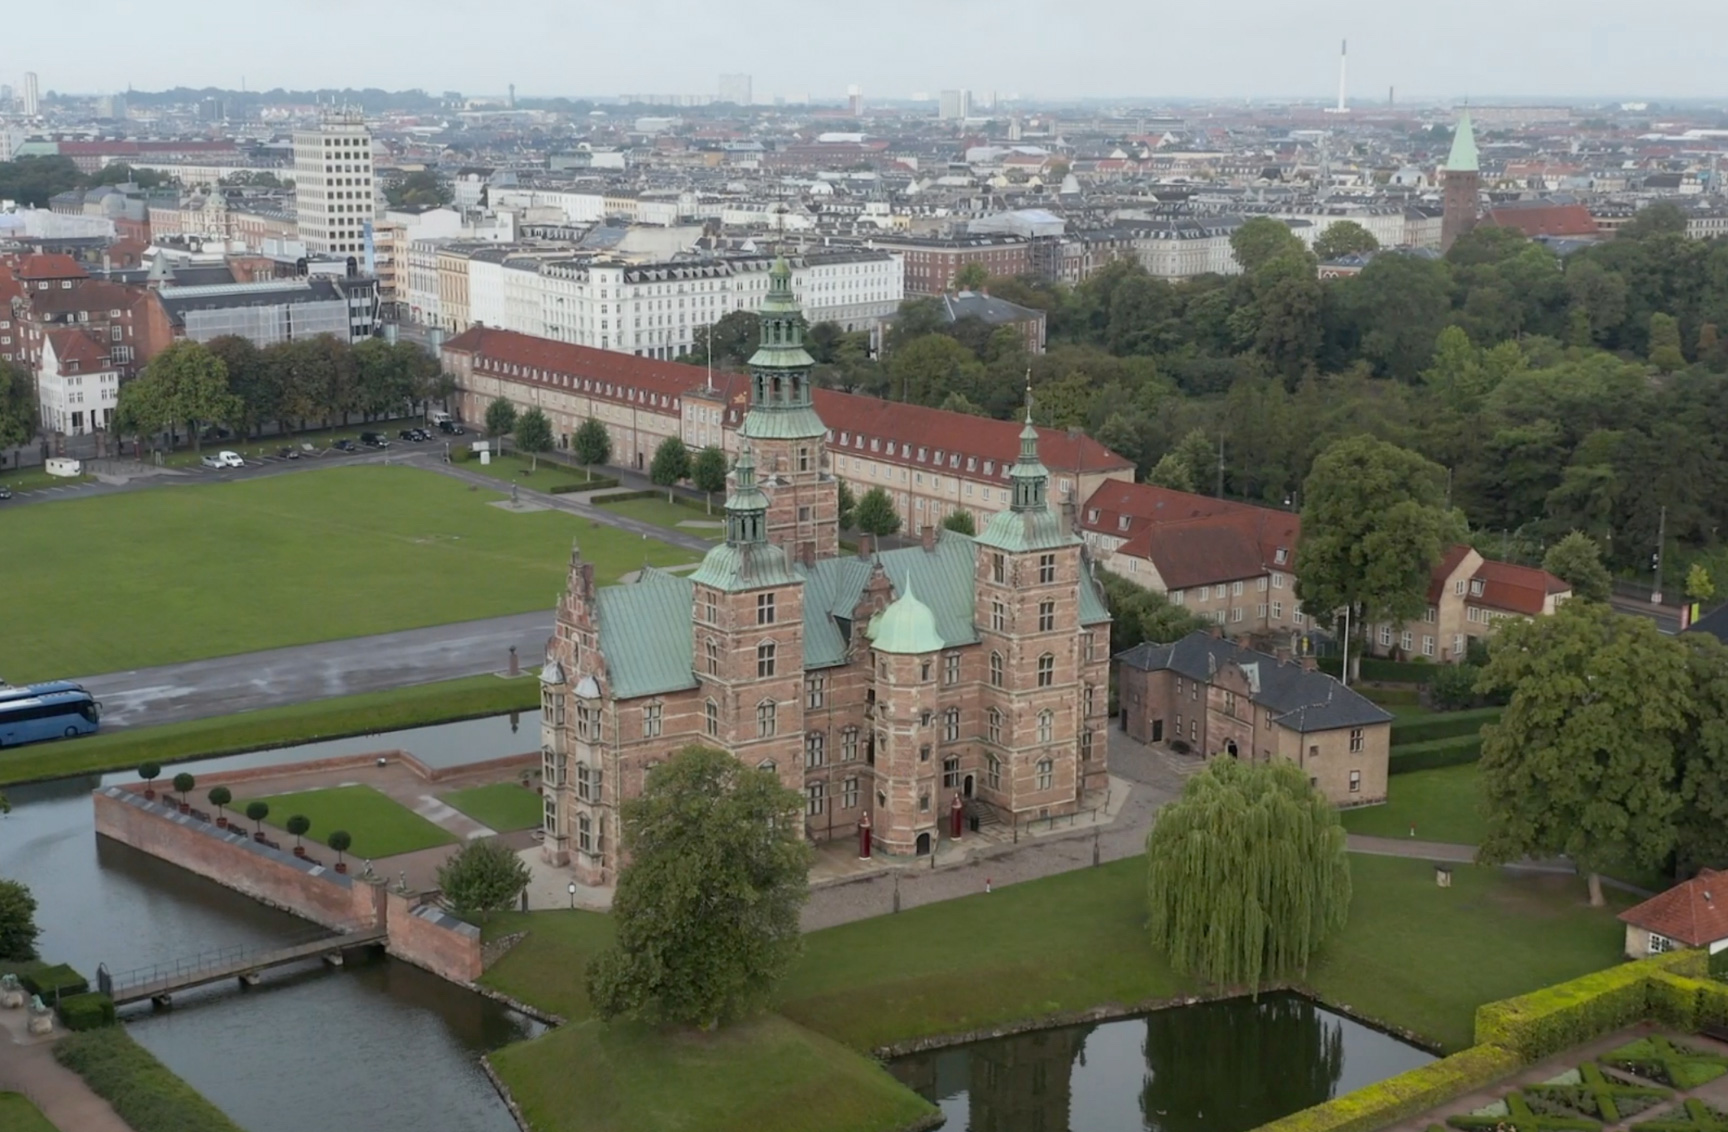 image of Rosenborg castle form the air